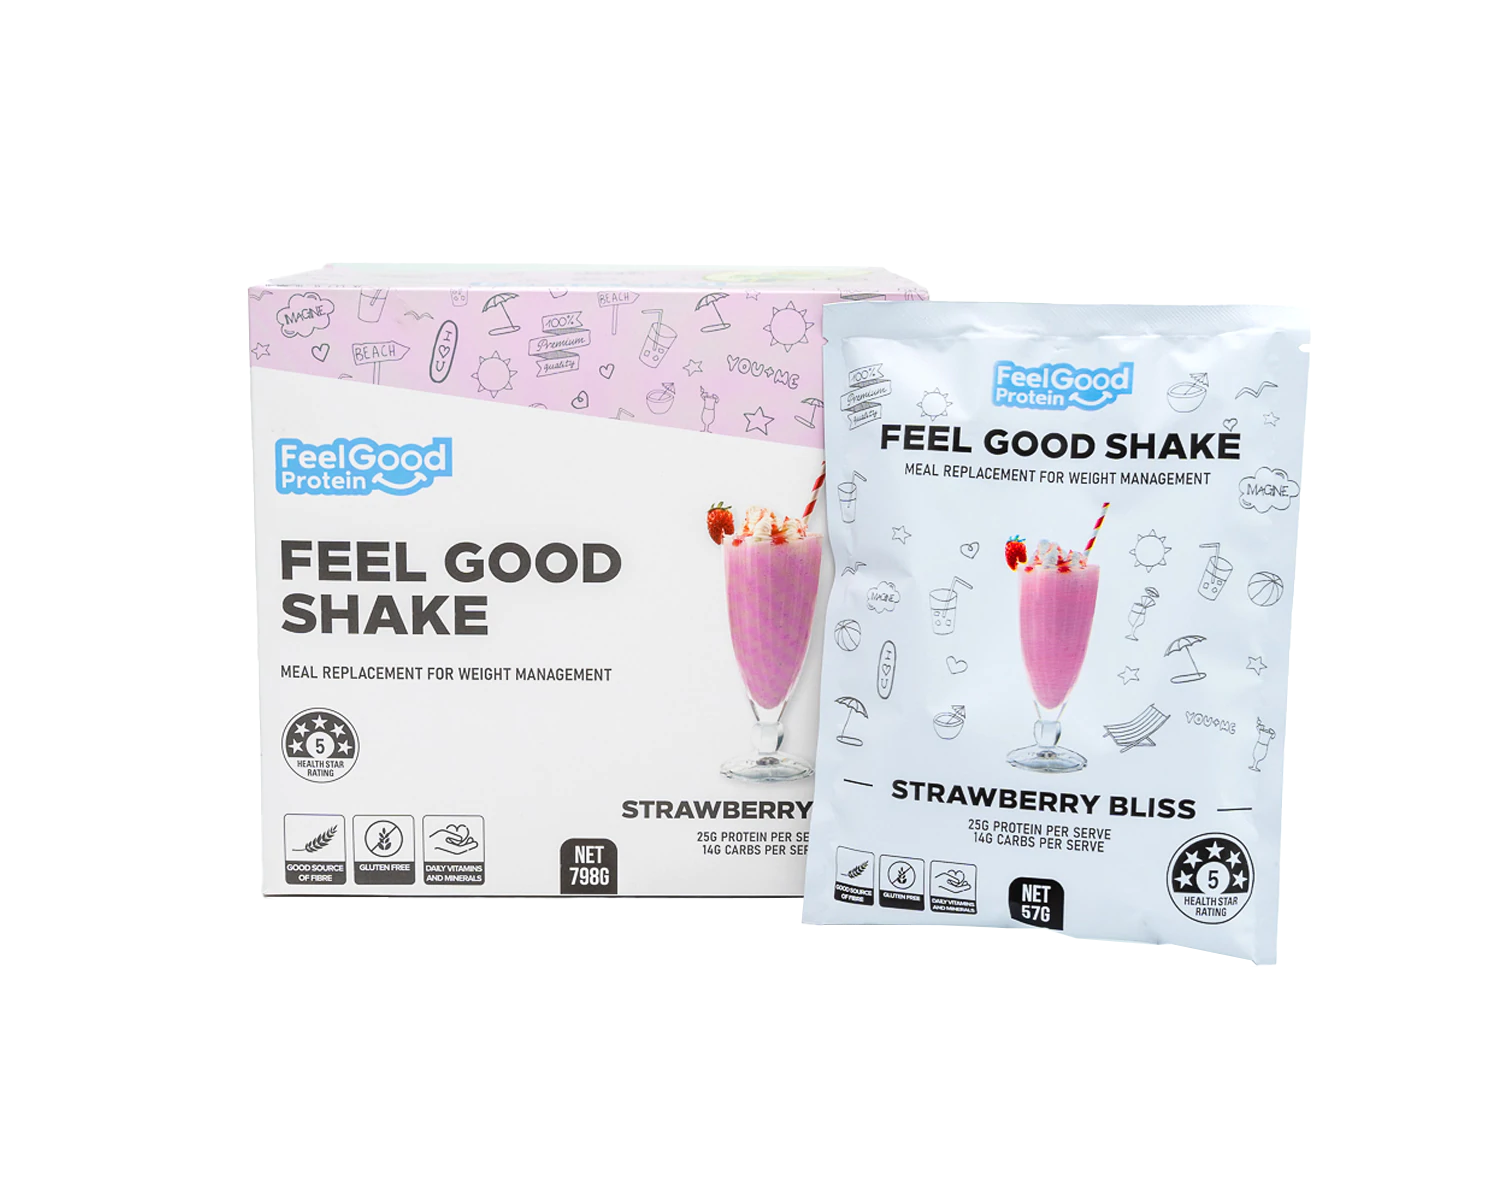 Feel Good Meal Replacement Shake strawberry bliss flavour 